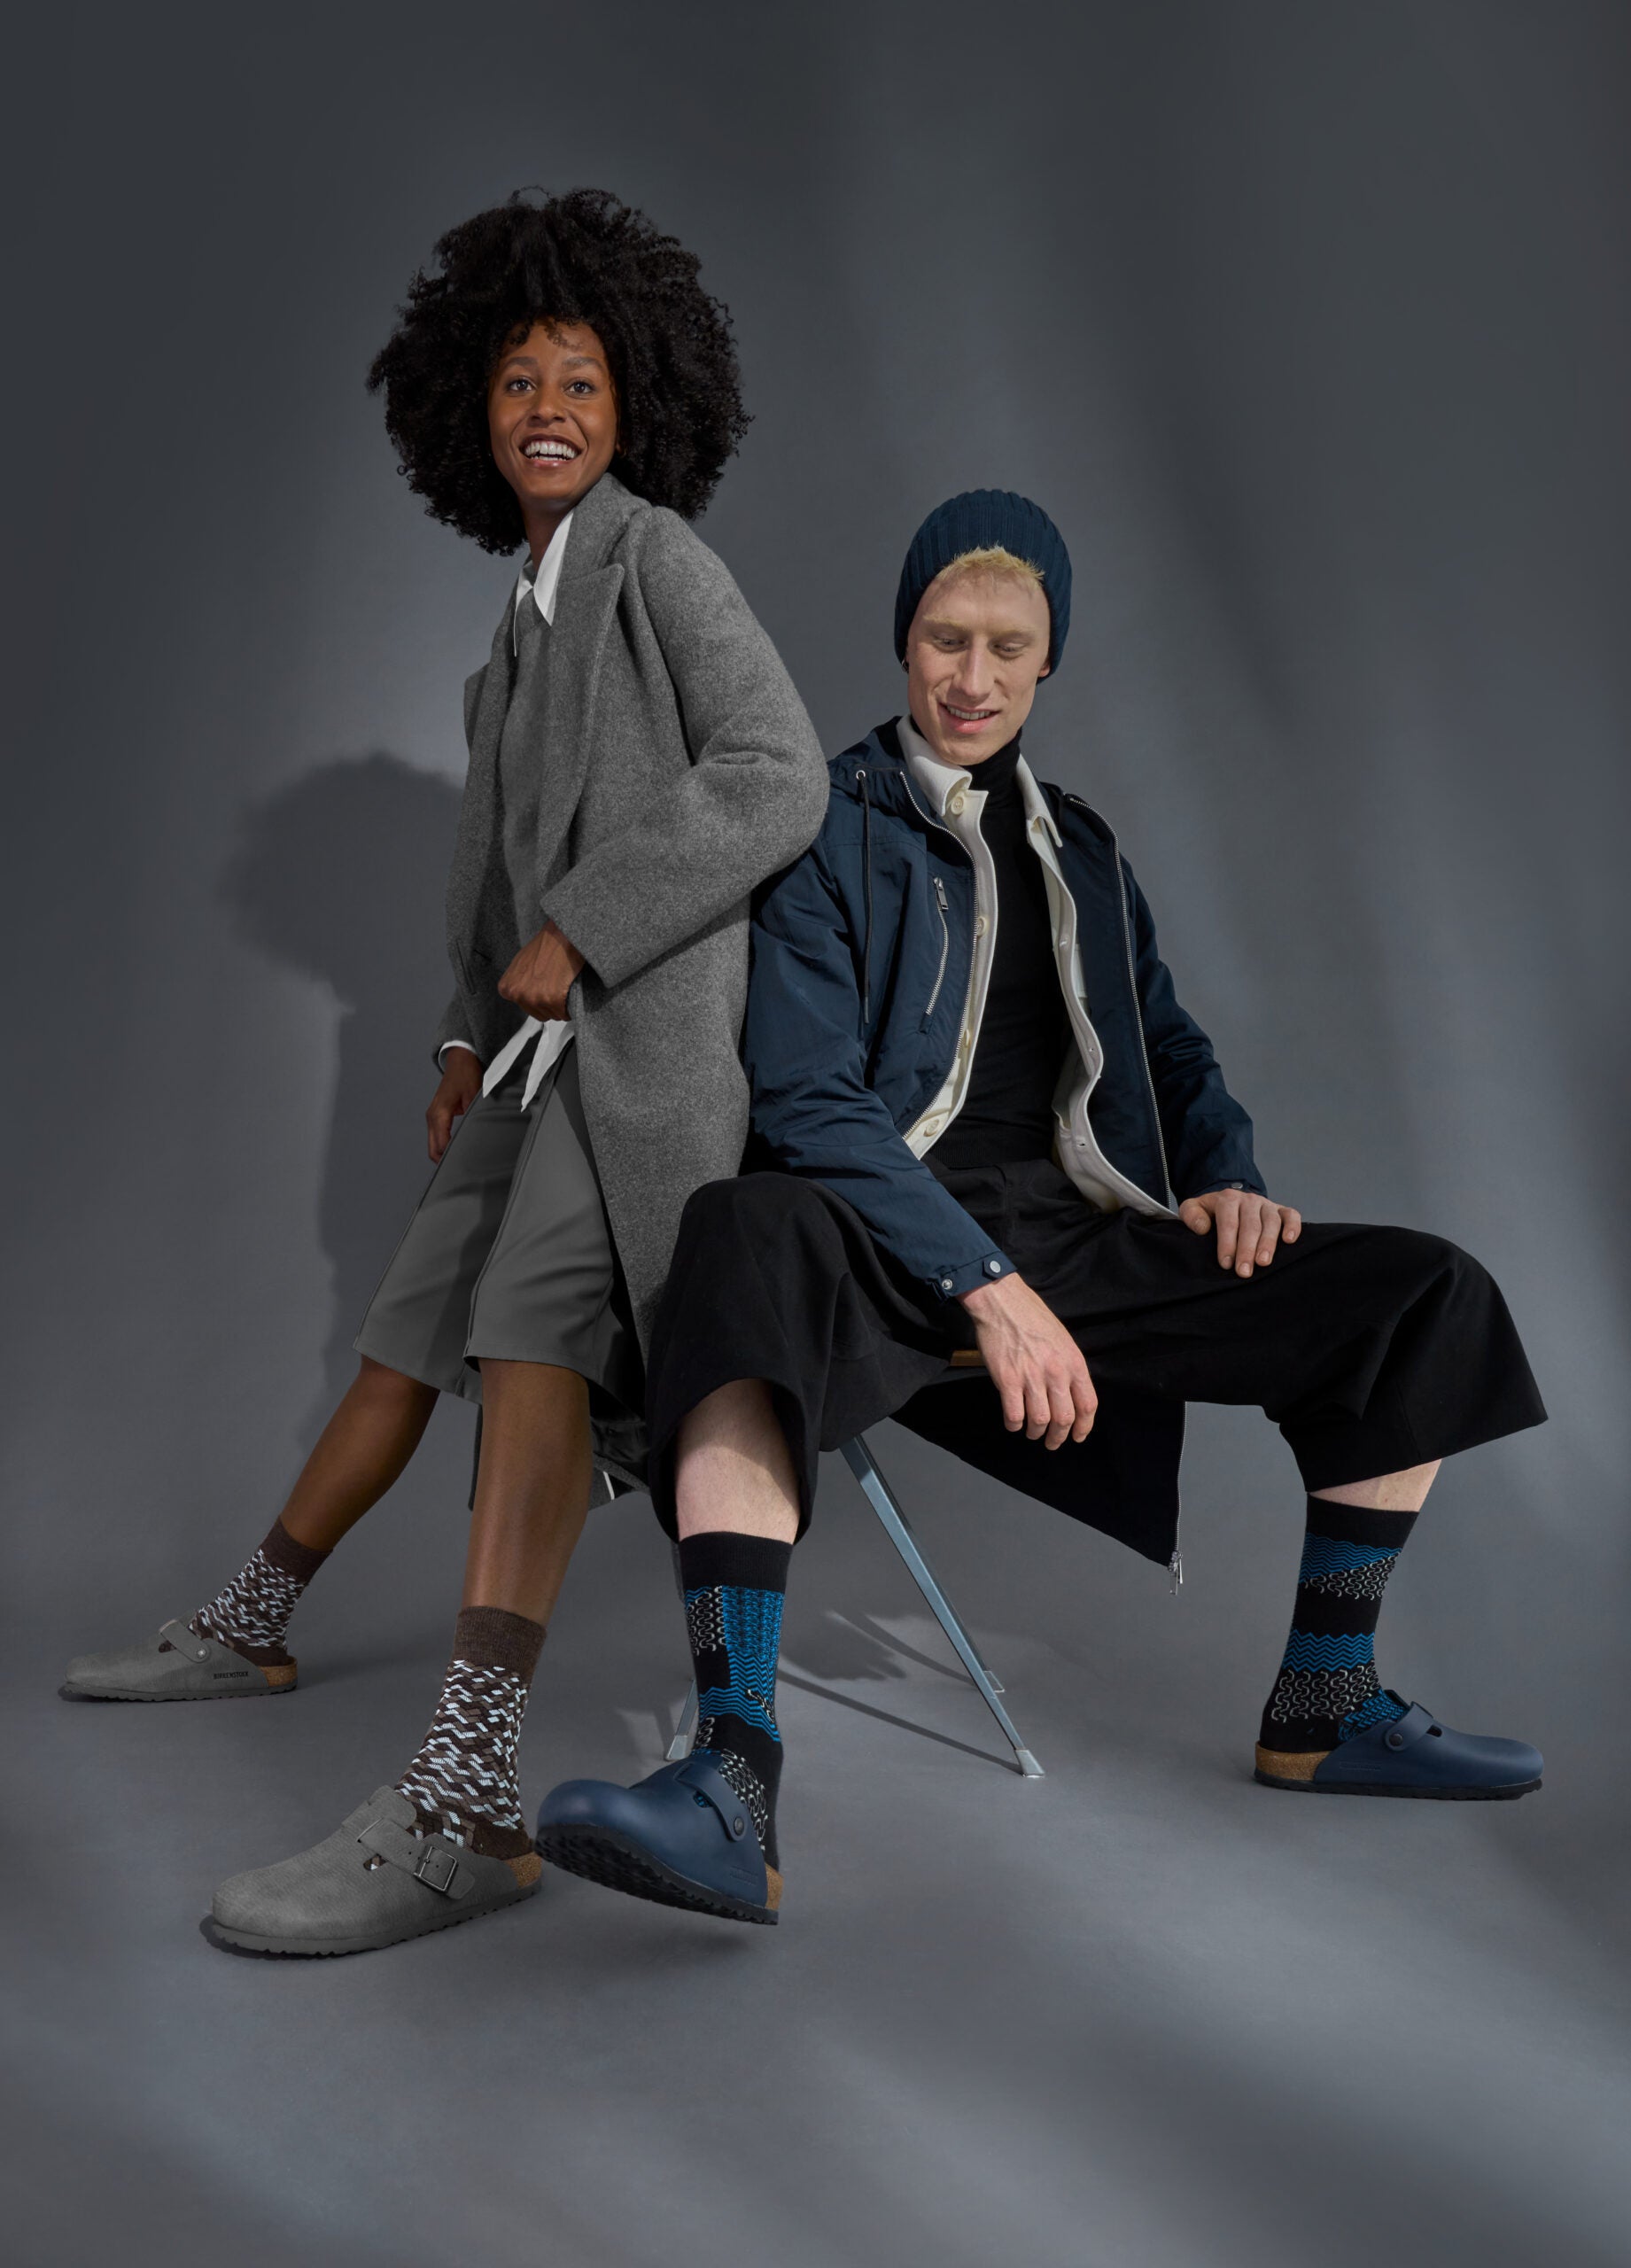 Lycra's new Thermolite tech helps socks retain warmth